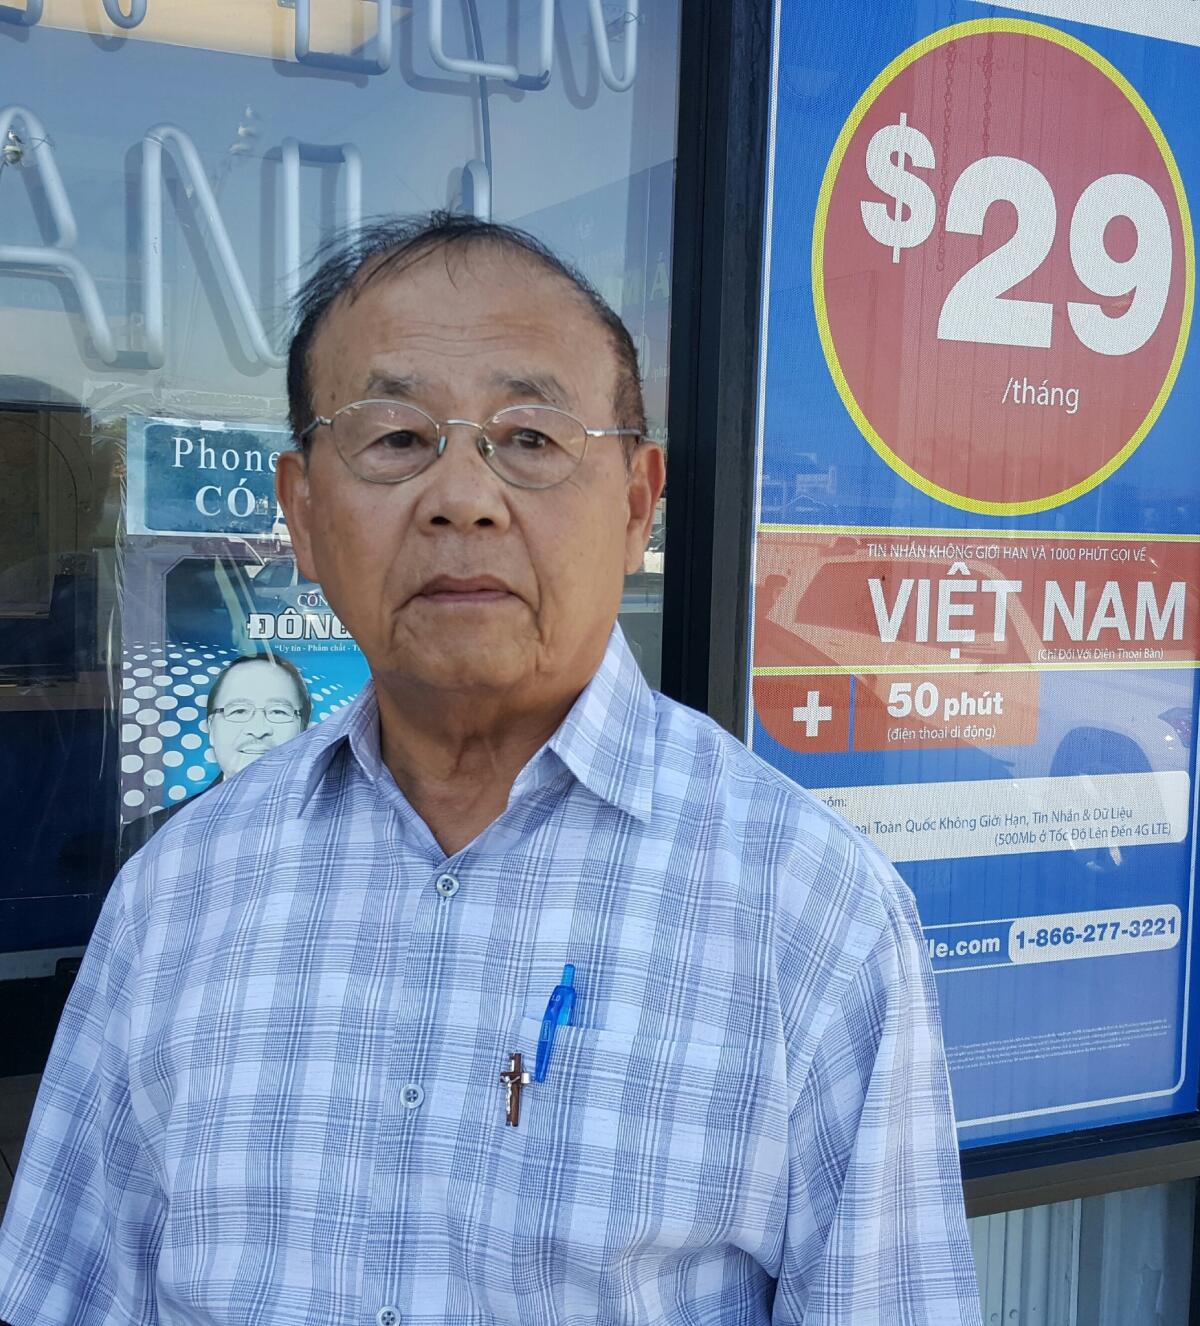 Thong Le, 75, of Westminster favors Donald Trump, attracted by his business experience and especially his alliance with the Republican party.